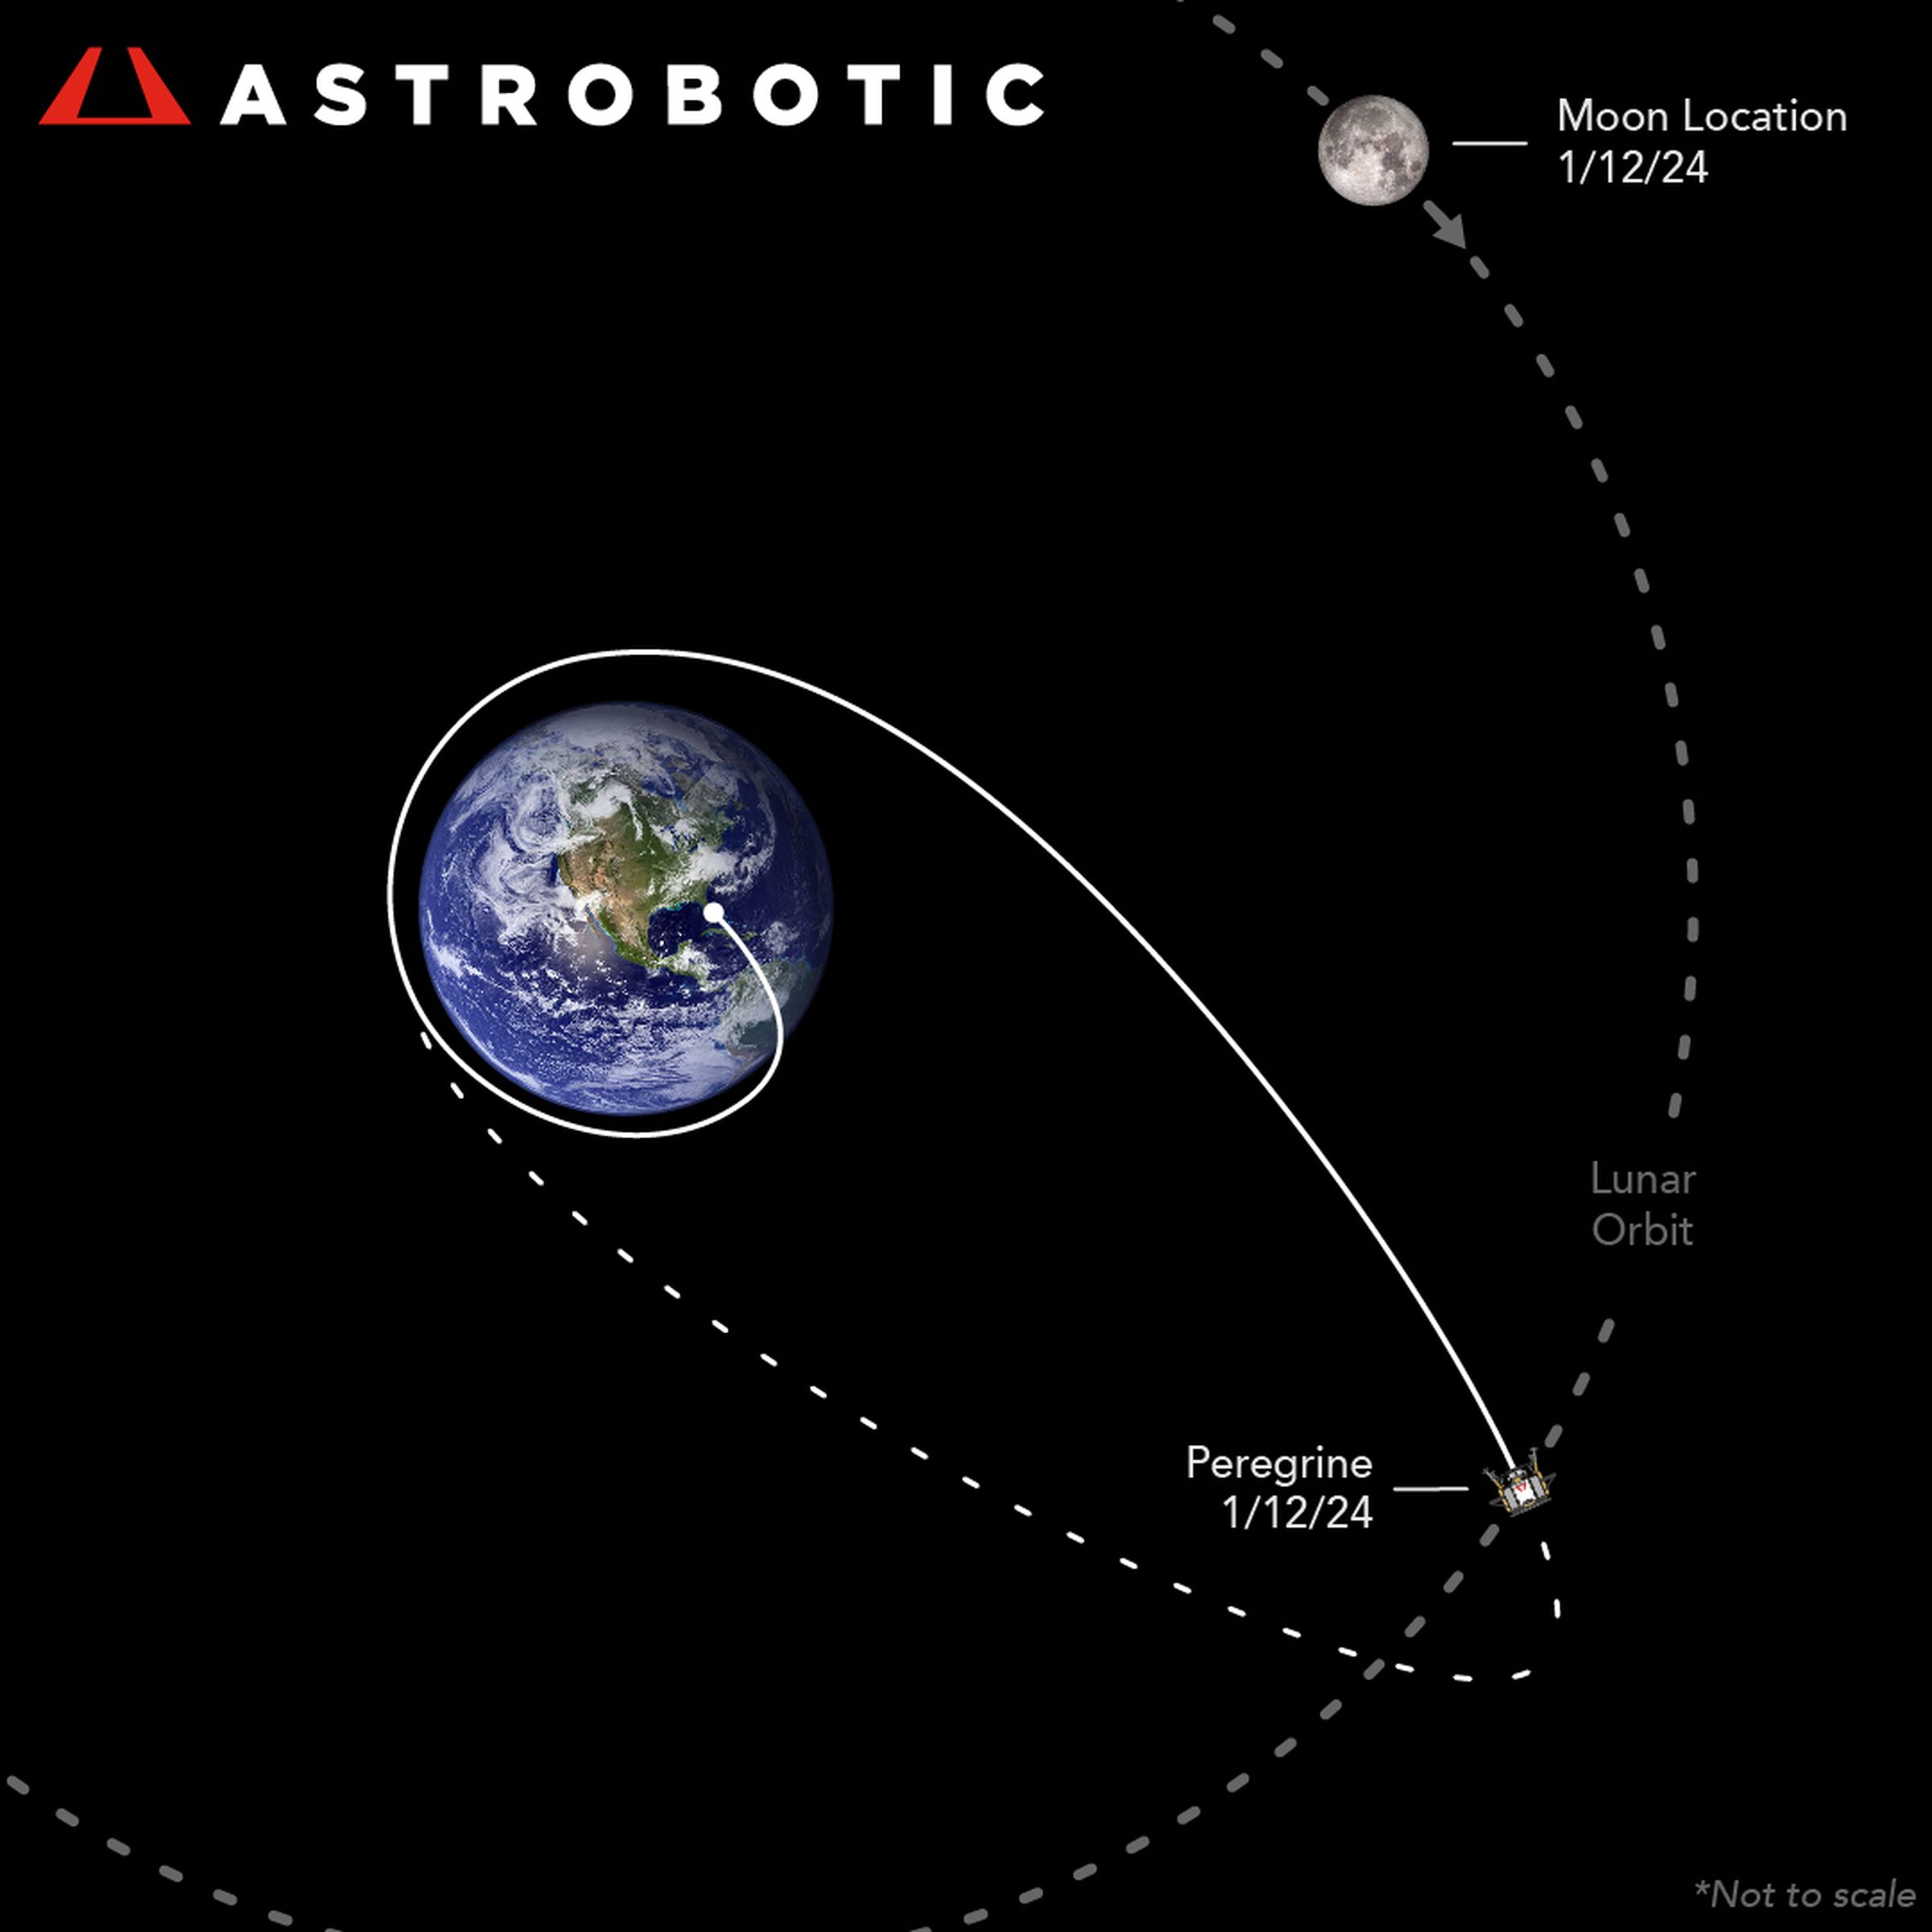 A graphic showing the Peregrine lander’s trajectory and position as of Friday, relative to the moon, with a curved line of dashes representing the moon’s path and another showing the lander’s expected trajectory back toward Earth.